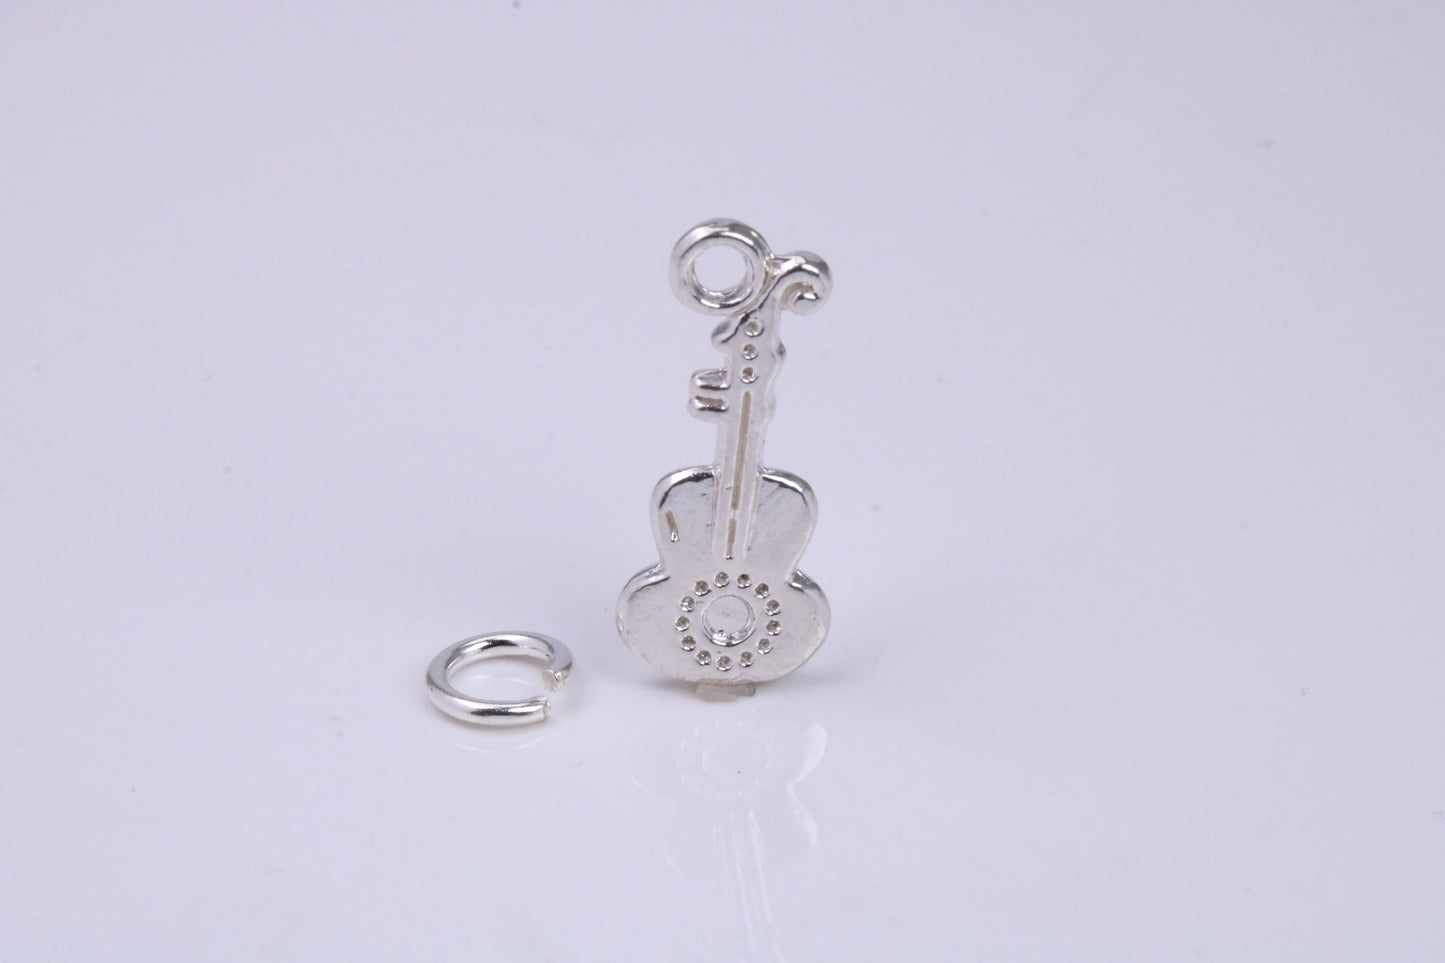 Guitar Charm, Traditional Charm, Made from Solid 925 Grade Sterling Silver, Complete with Attachment Link